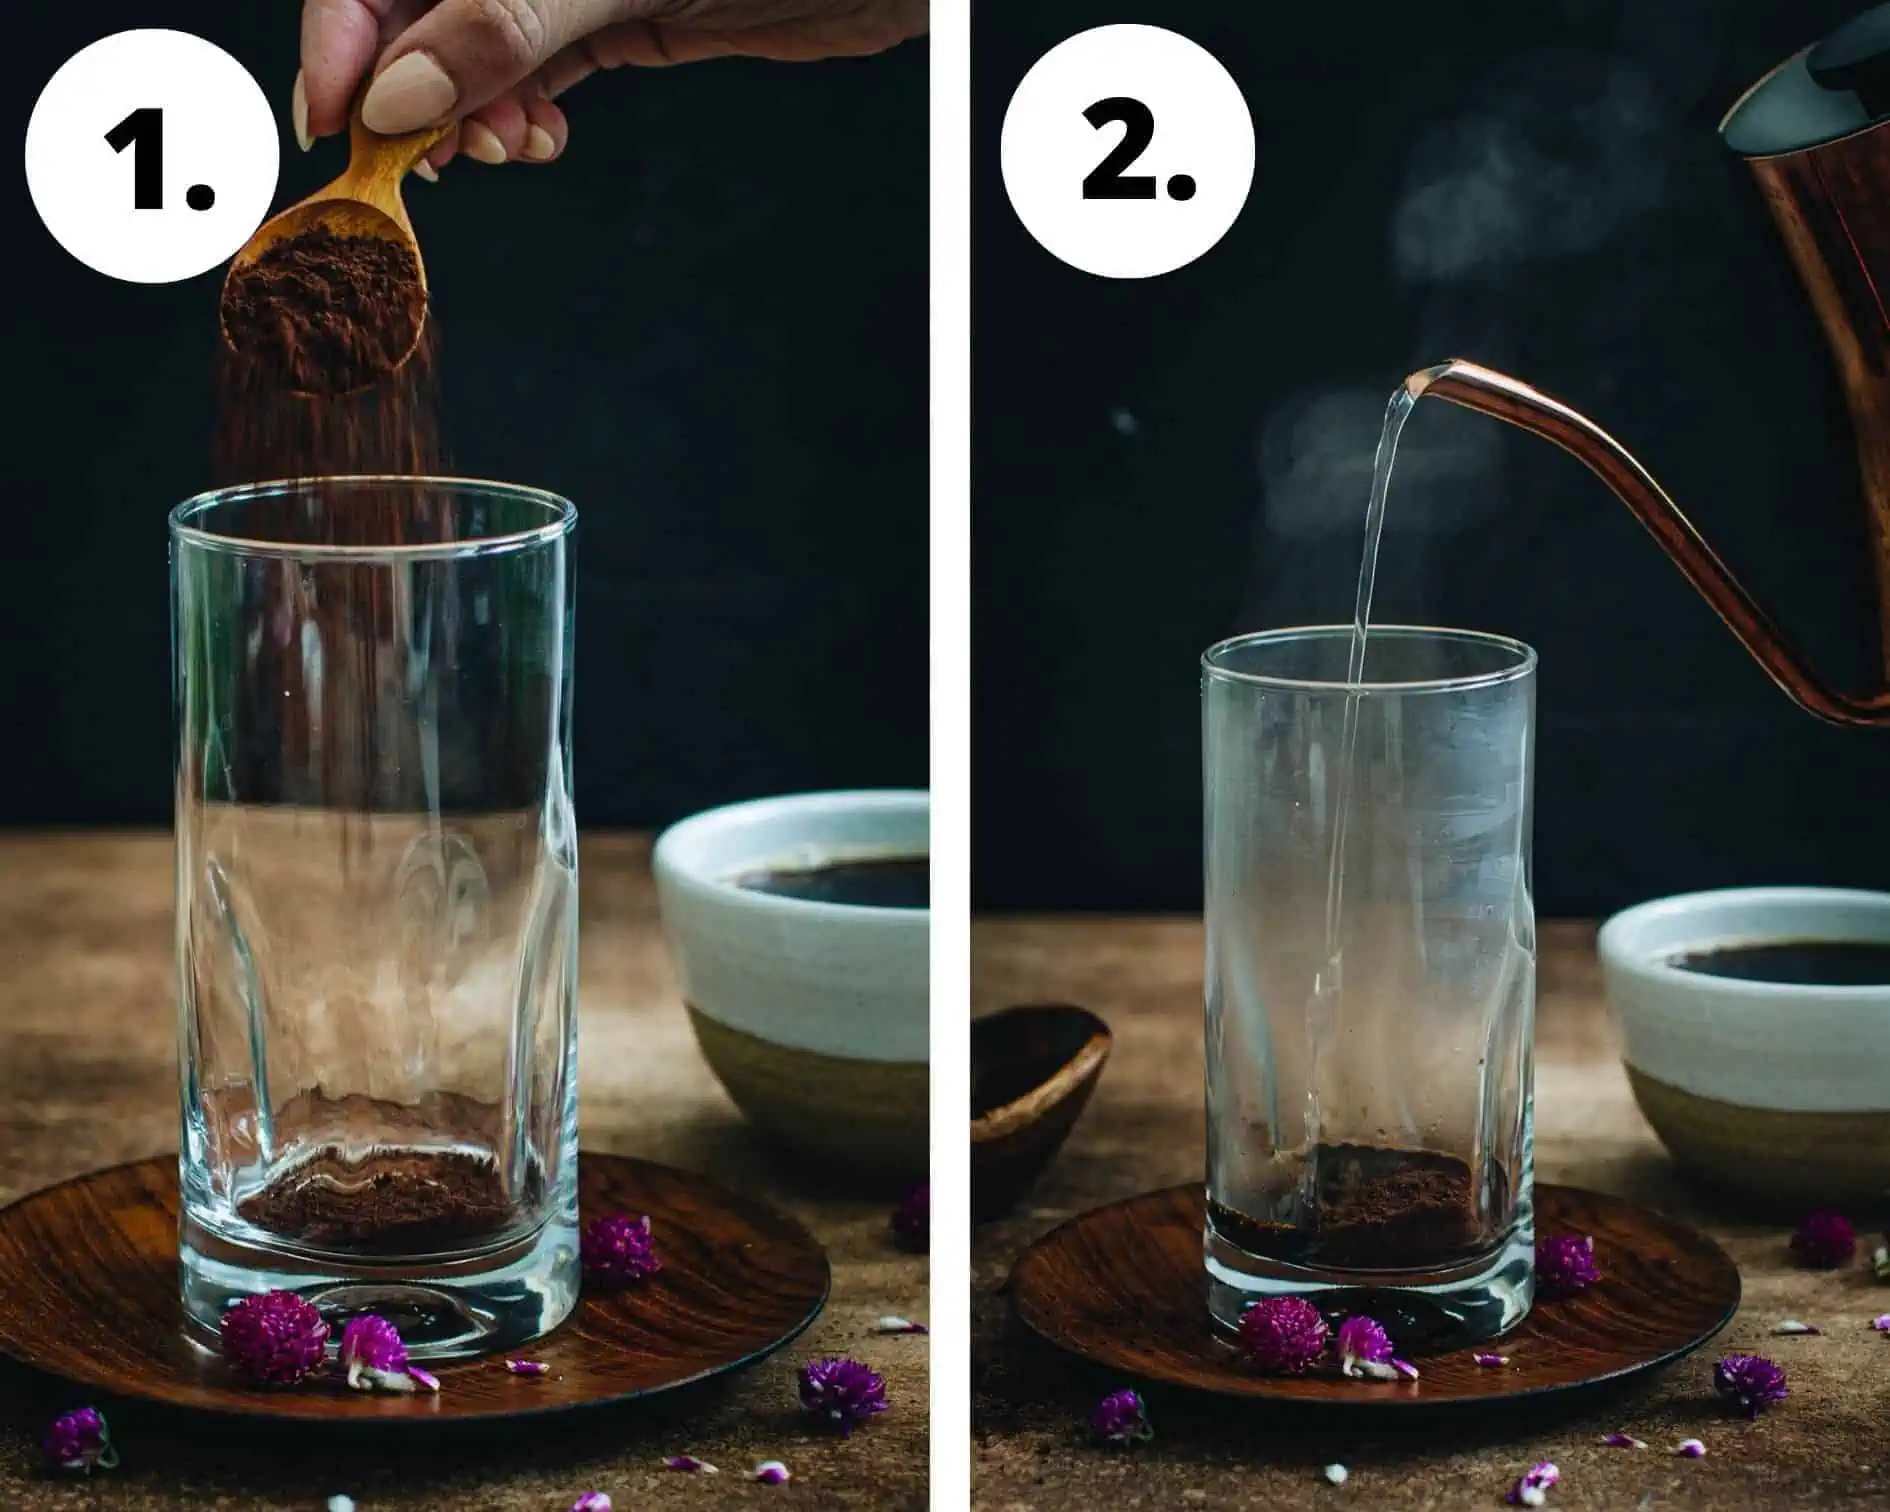 Instant iced coffee process steps 1 and 2.